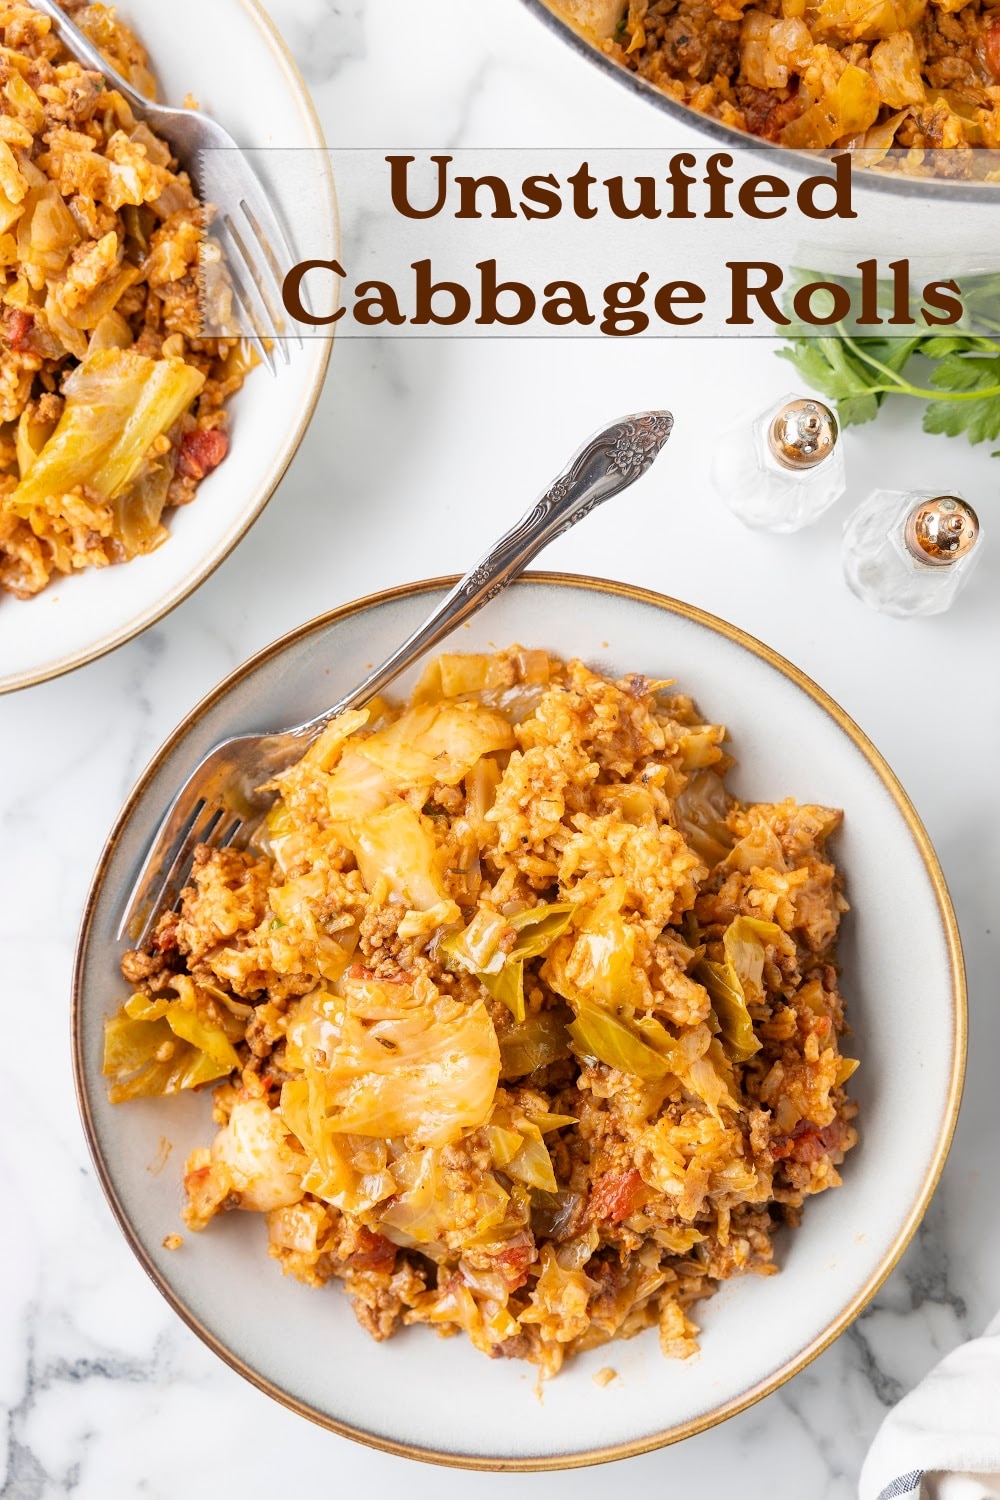 Make delicious unstuffed cabbage rolls in less than an hour! This savory meat-and-rice dish is a perfect weeknight dinner option. via @cmpollak1